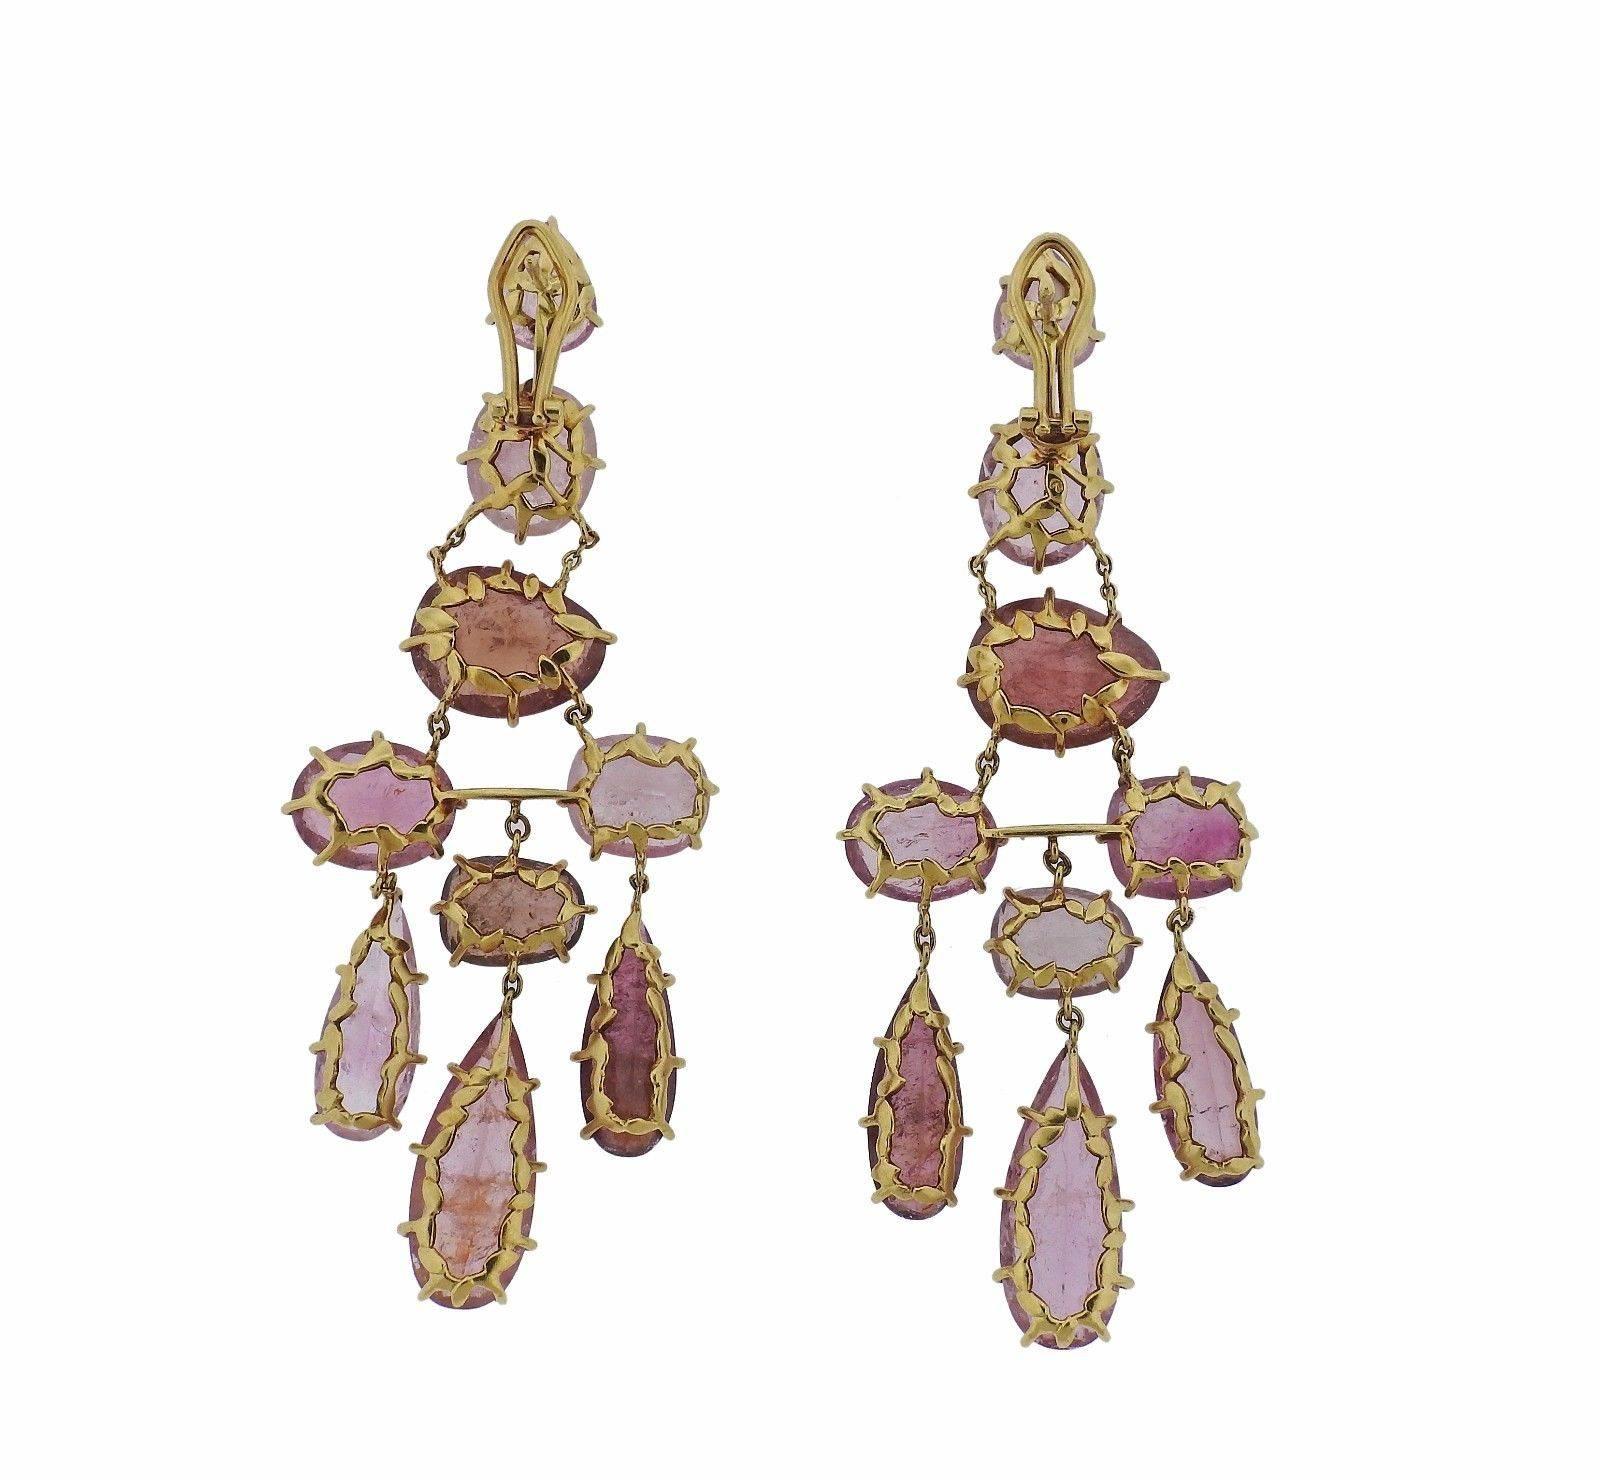 A pair of 18k yellow gold earrings set with pink tourmalines. Earrings are 75mm long x 28mm wide.  The weight of the pair is 20.5 grams.  Marked: Signature S and Star marks, 750.